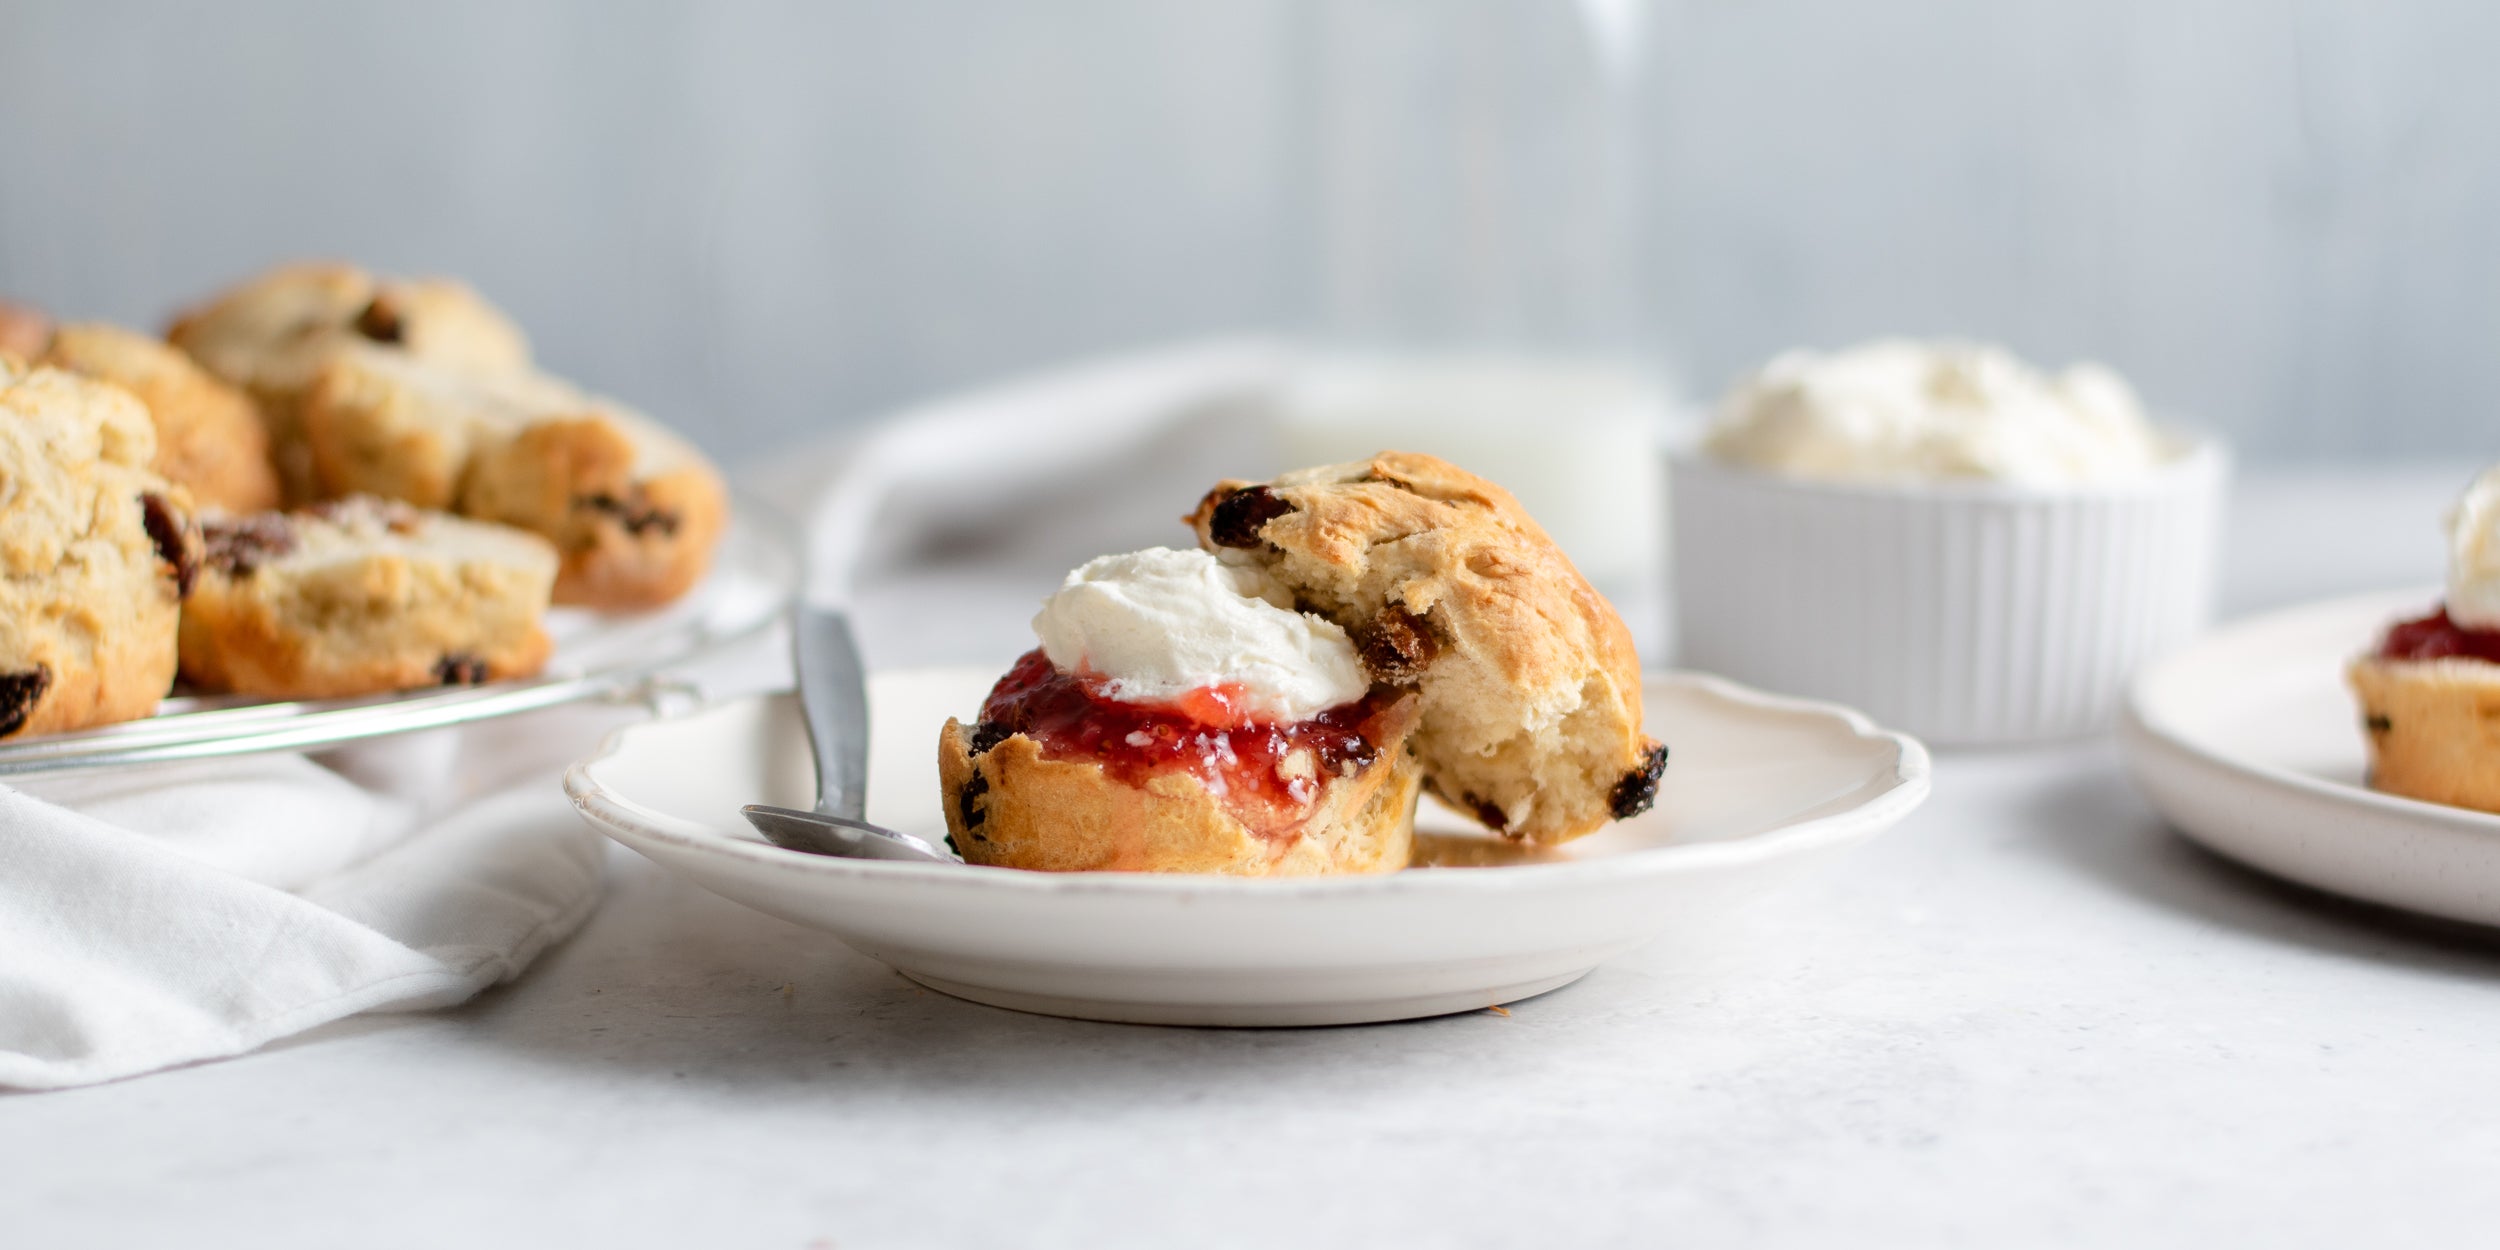 Close up of Fruit Scones served on a plate, cut in half with a dollop of cream and jam. With a ramekin of whipped cream in the background